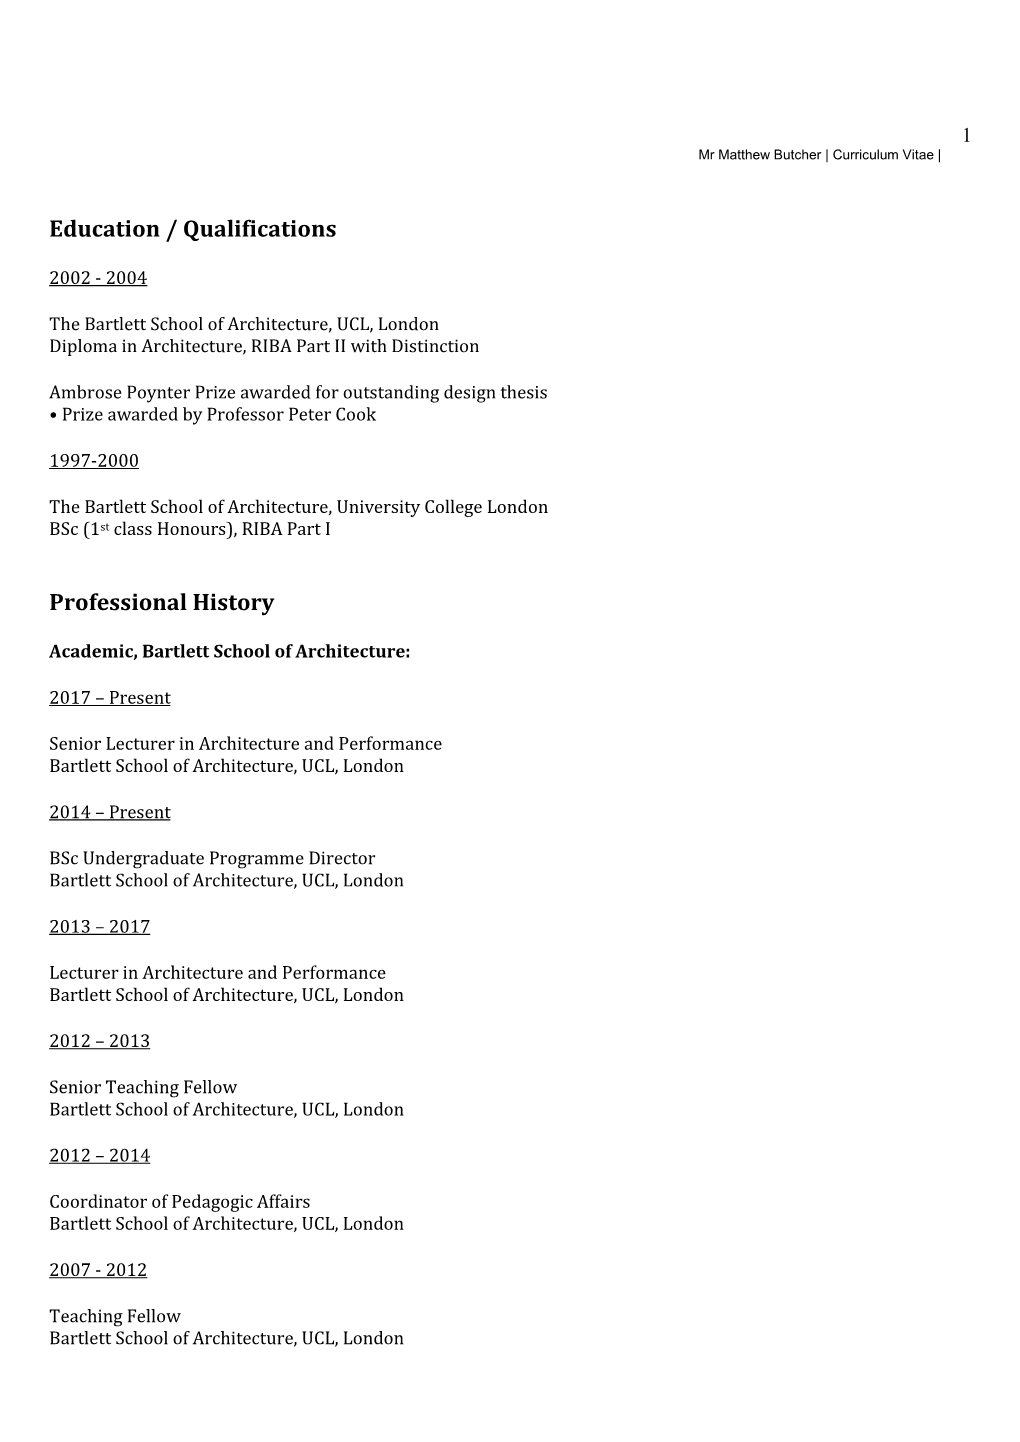 Education / Qualifications Professional History